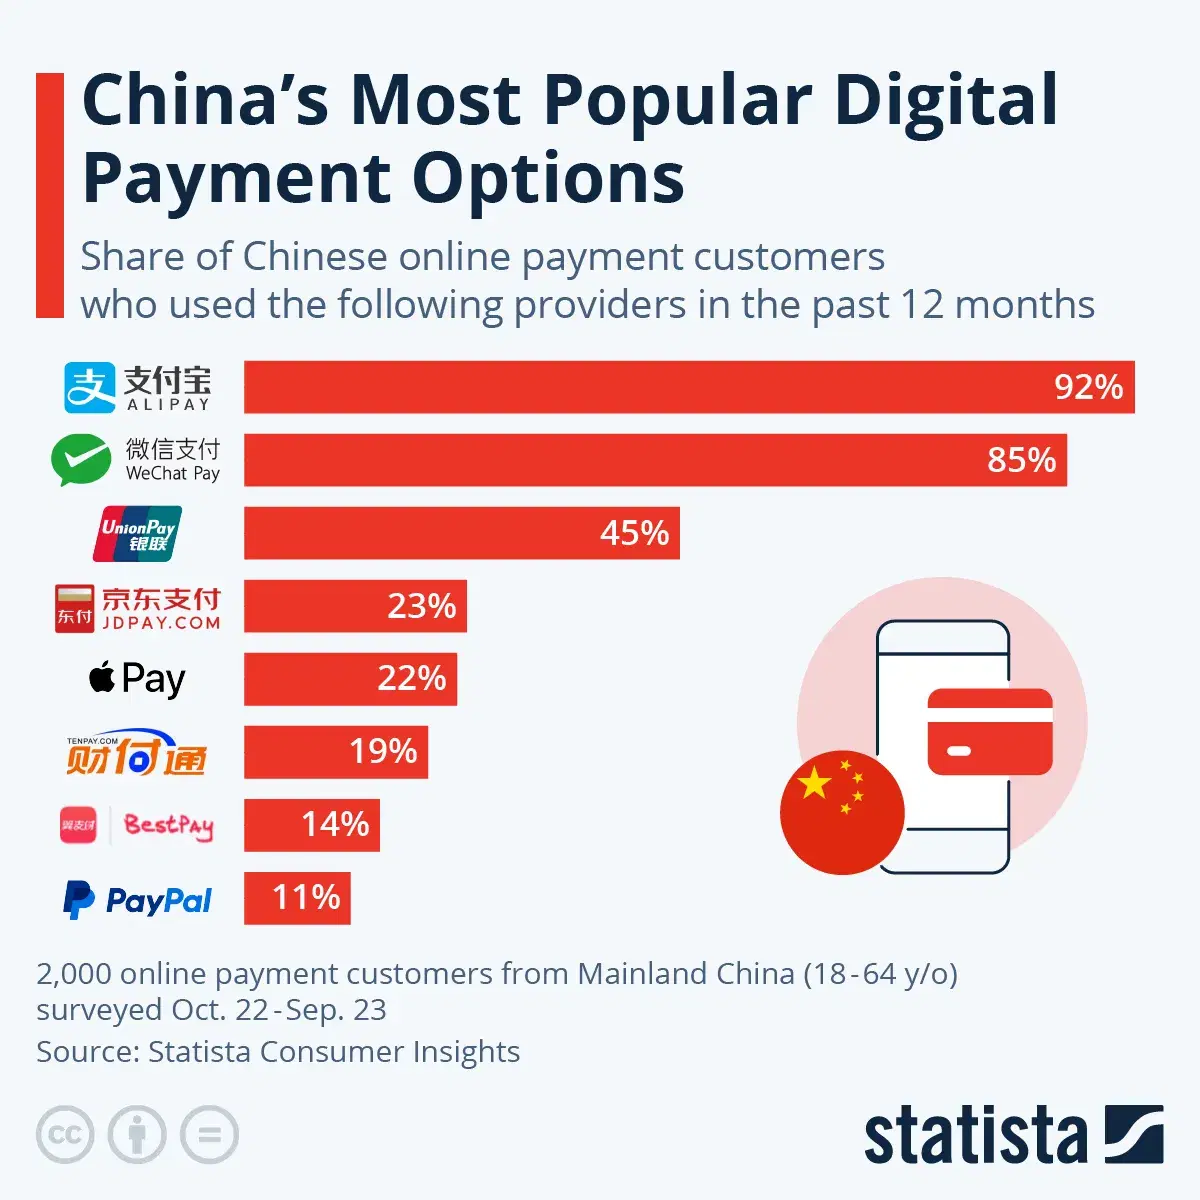 China's Most Popular Digital Payment Services